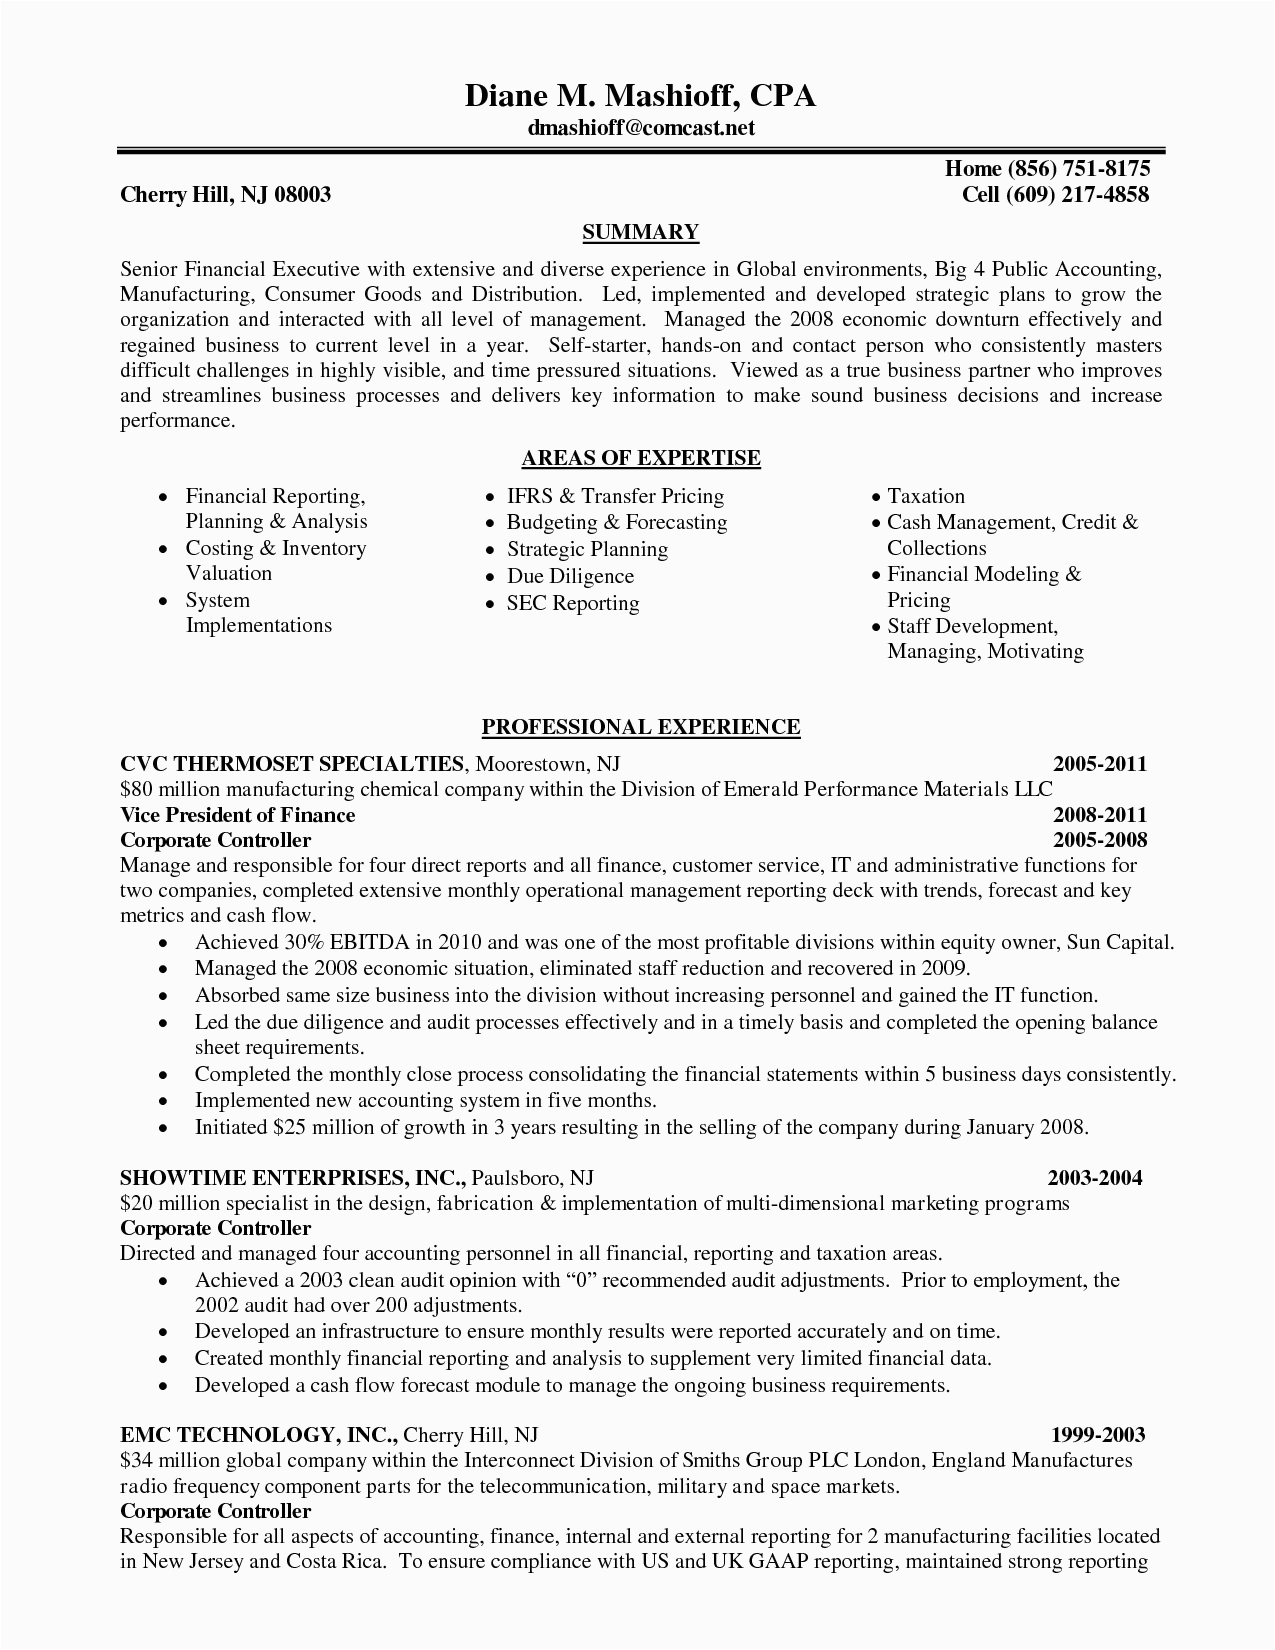 Sample Resume with Big 4 Tax Experience Big 4 Cv Template Resume Examples